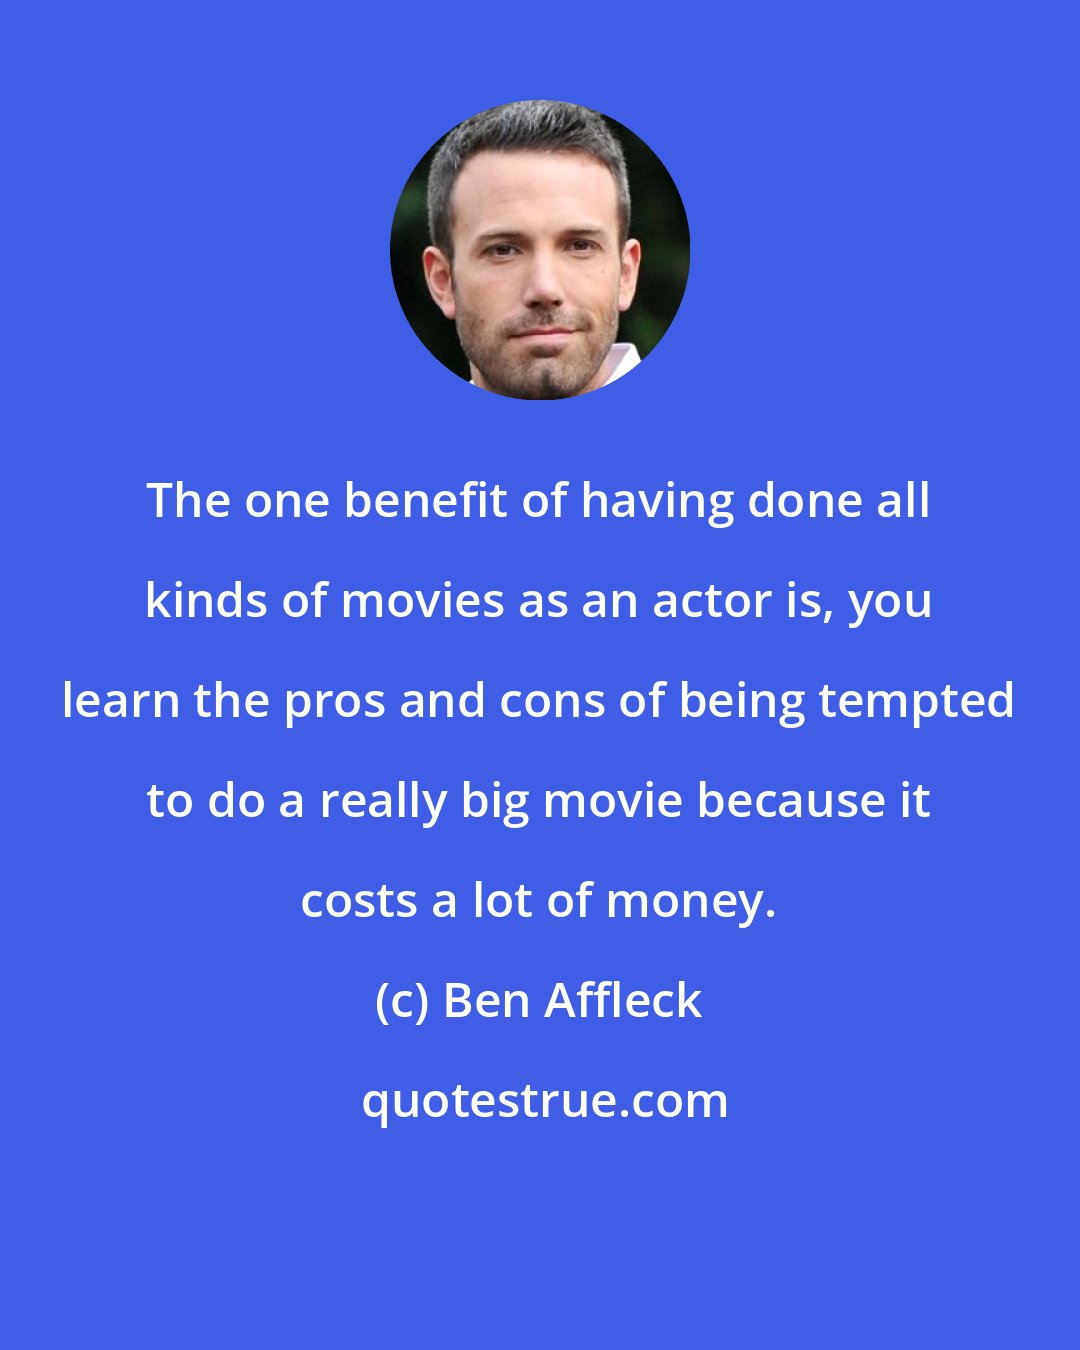 Ben Affleck: The one benefit of having done all kinds of movies as an actor is, you learn the pros and cons of being tempted to do a really big movie because it costs a lot of money.